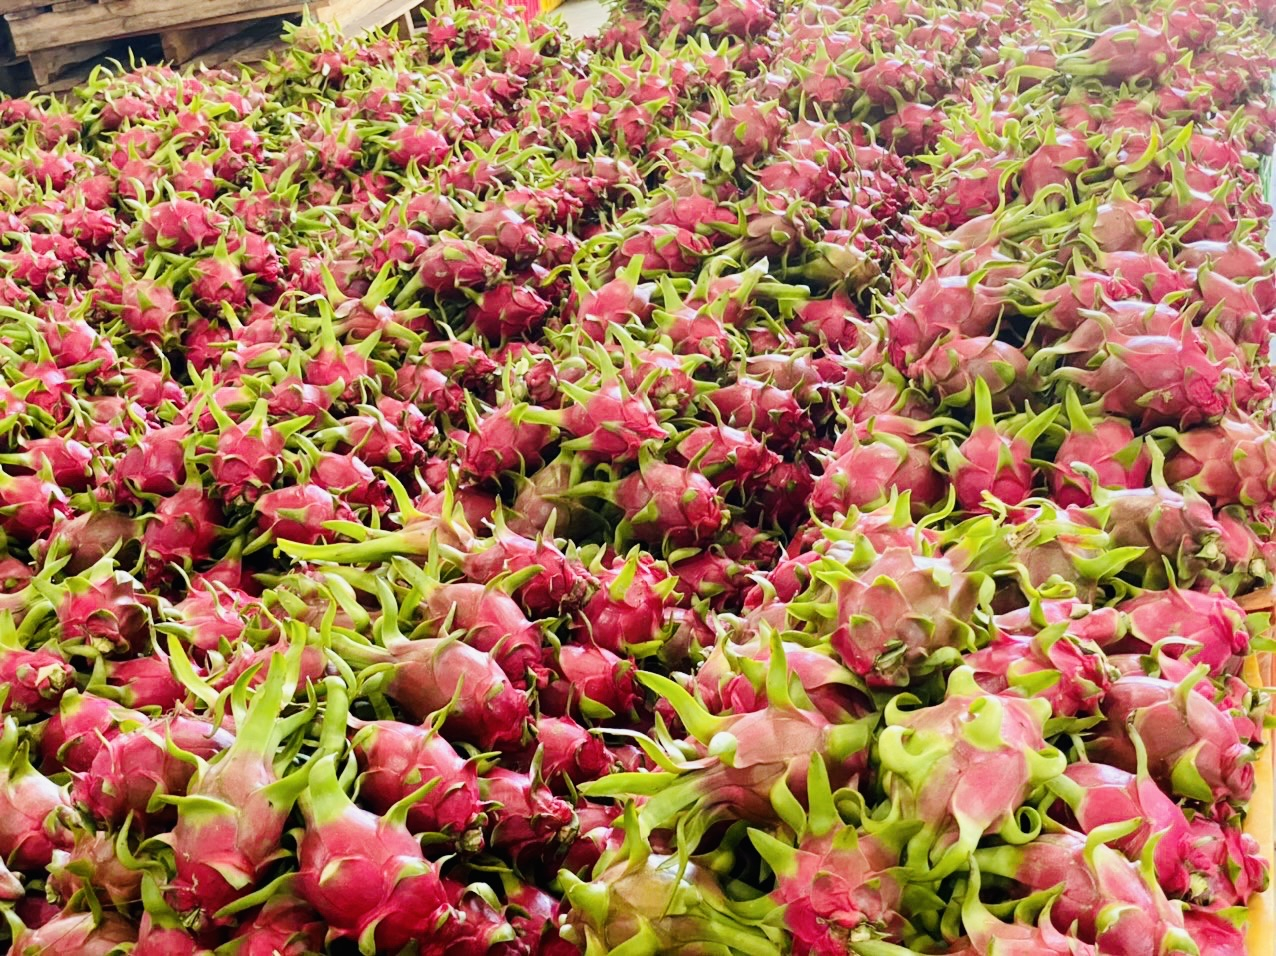 The production of dragon fruit in Binh Thuan province remains fragmented, small-scale, and lacks integration. Photo: M.P.